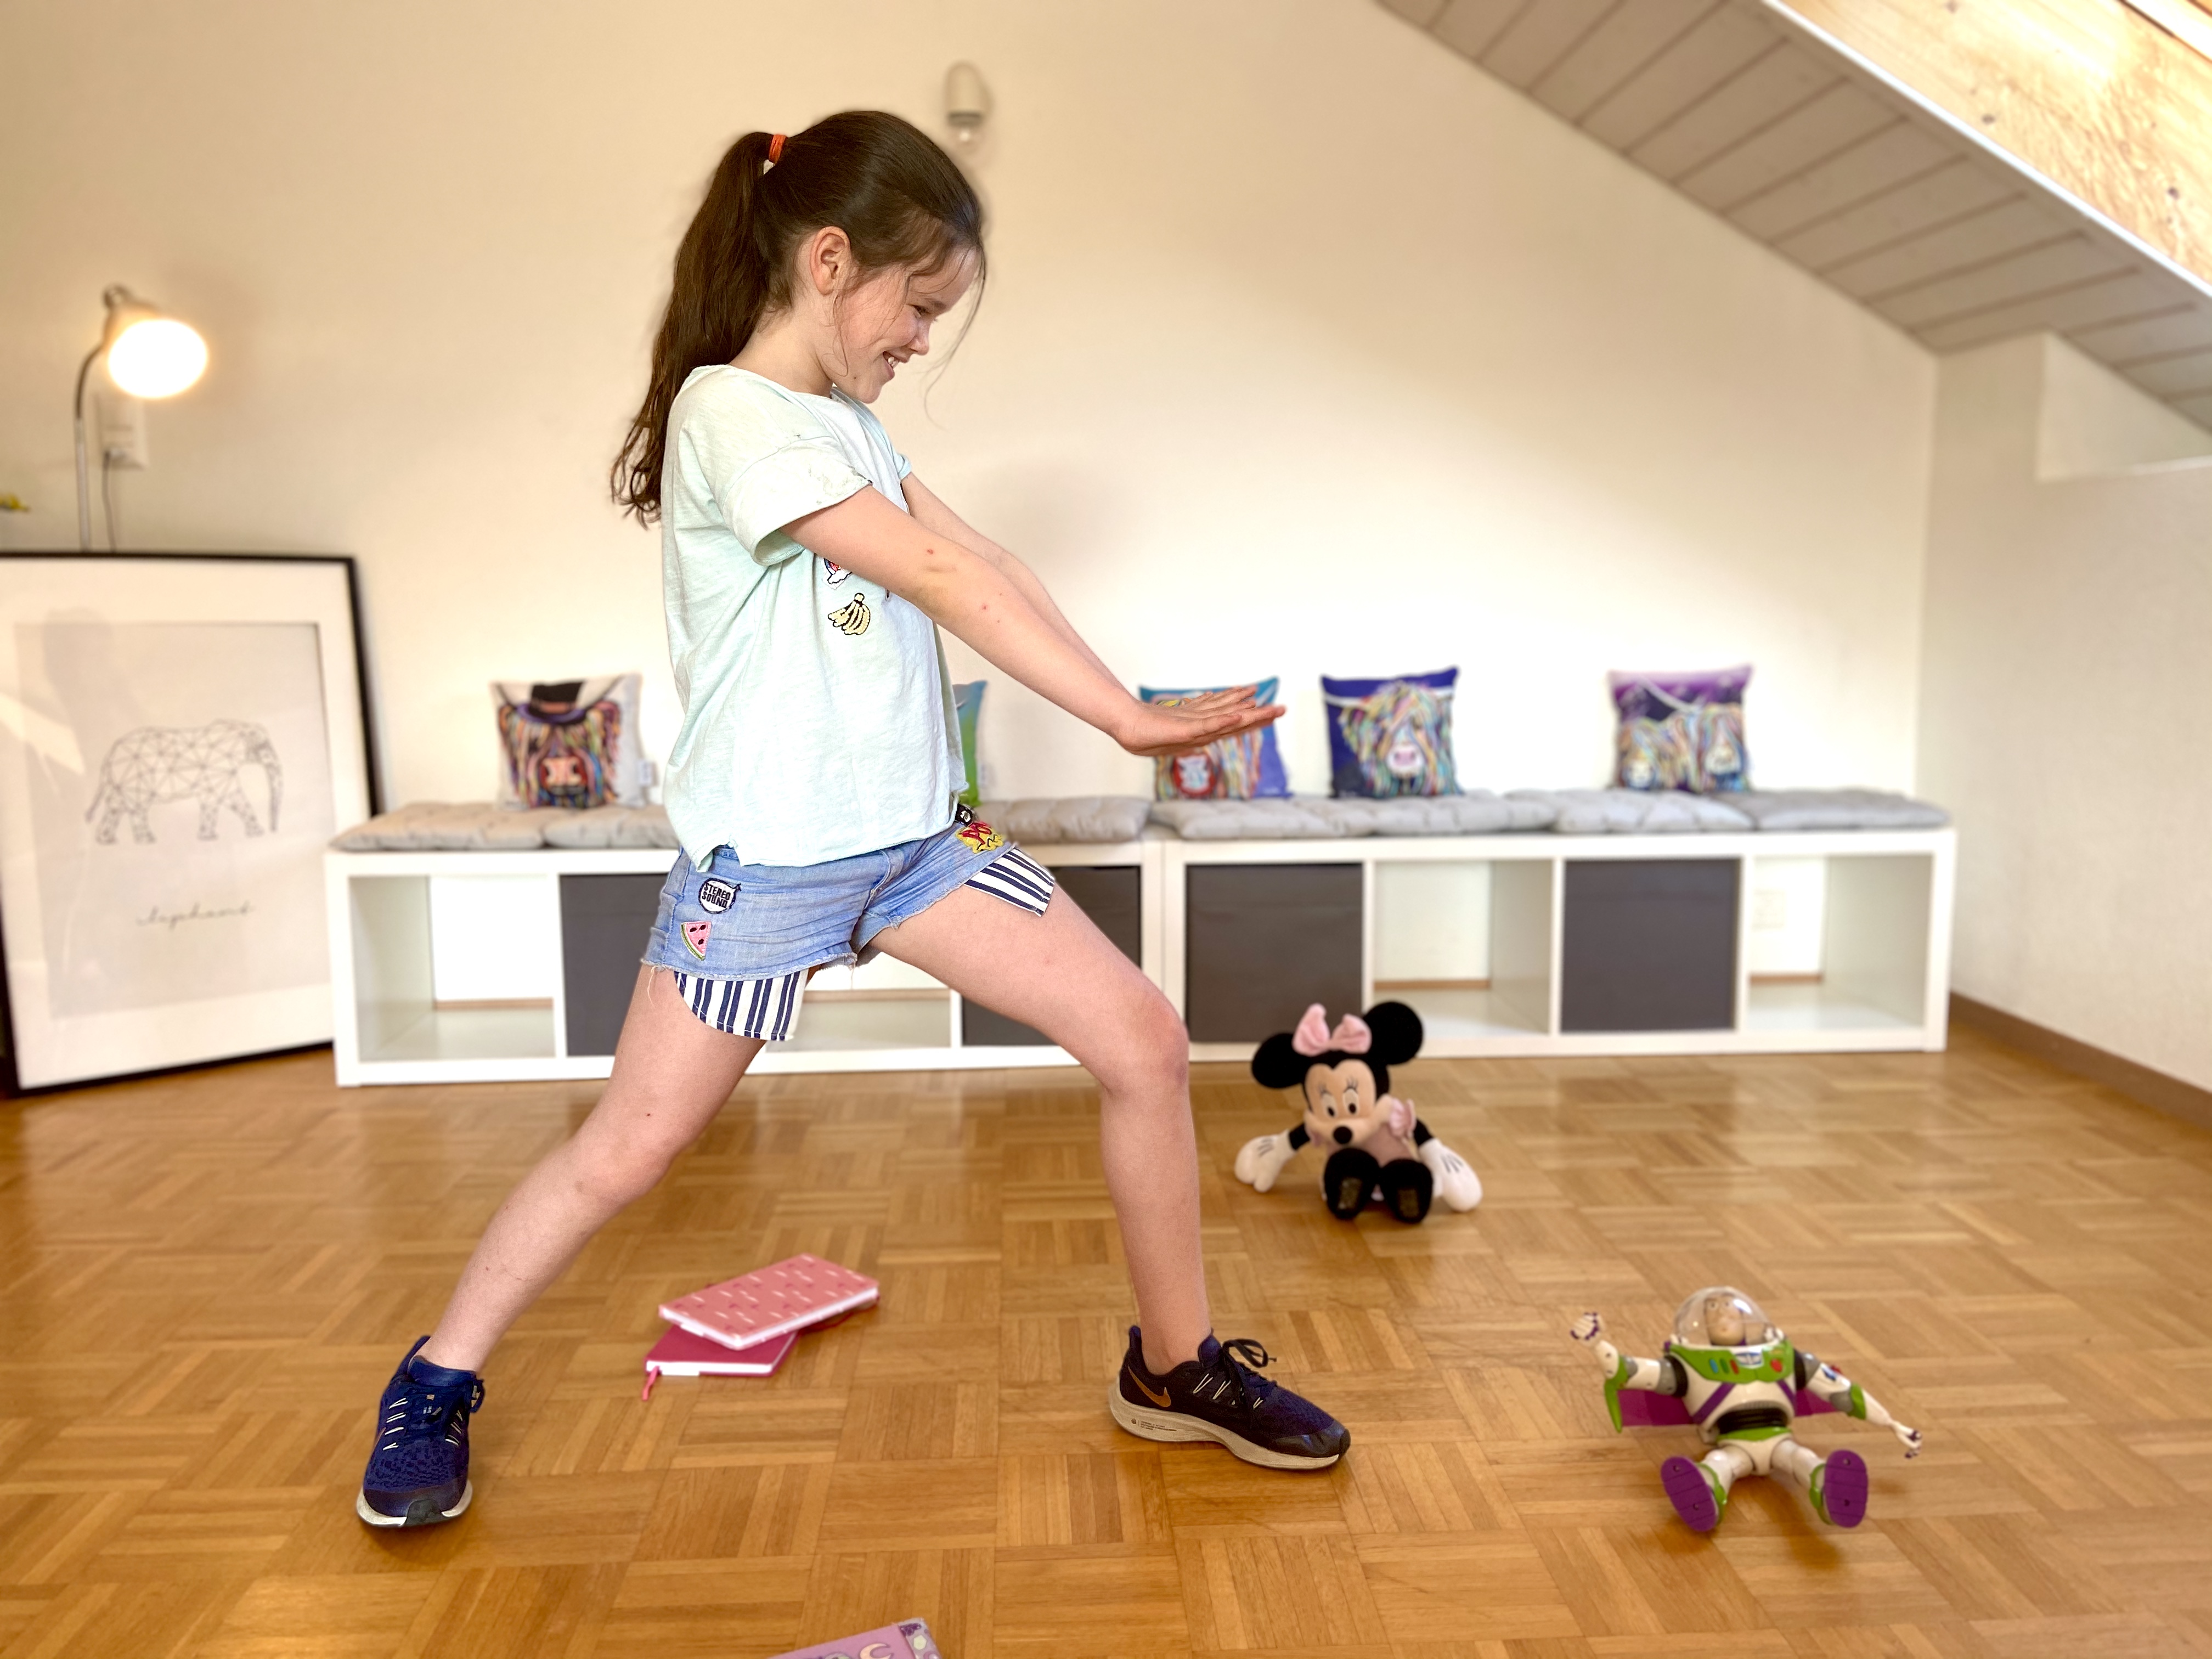 UEFA and Disney encourage children to be active at home with Playmakers